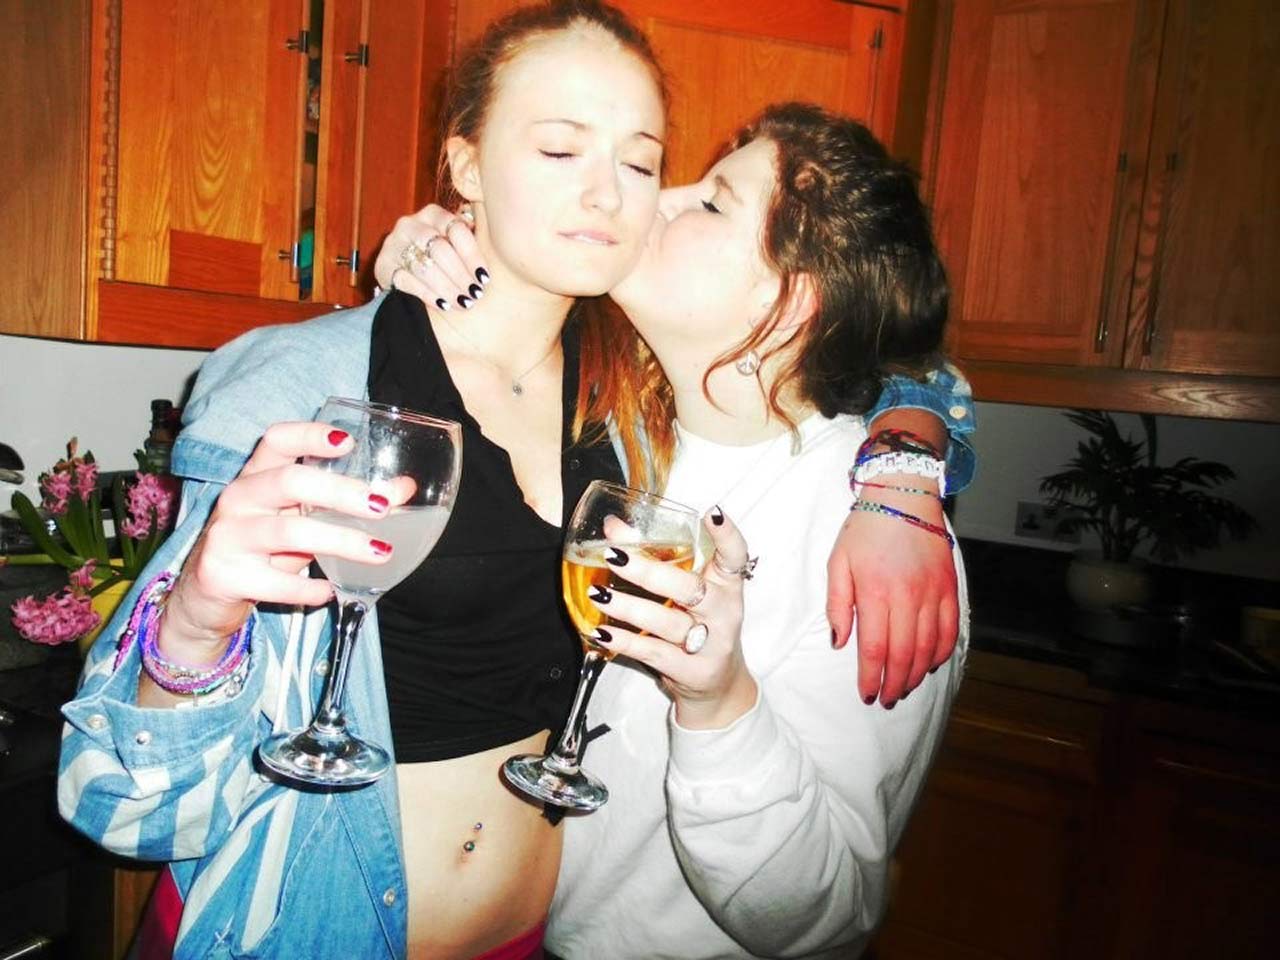 Private Revealing Photos Sophie Turner 14